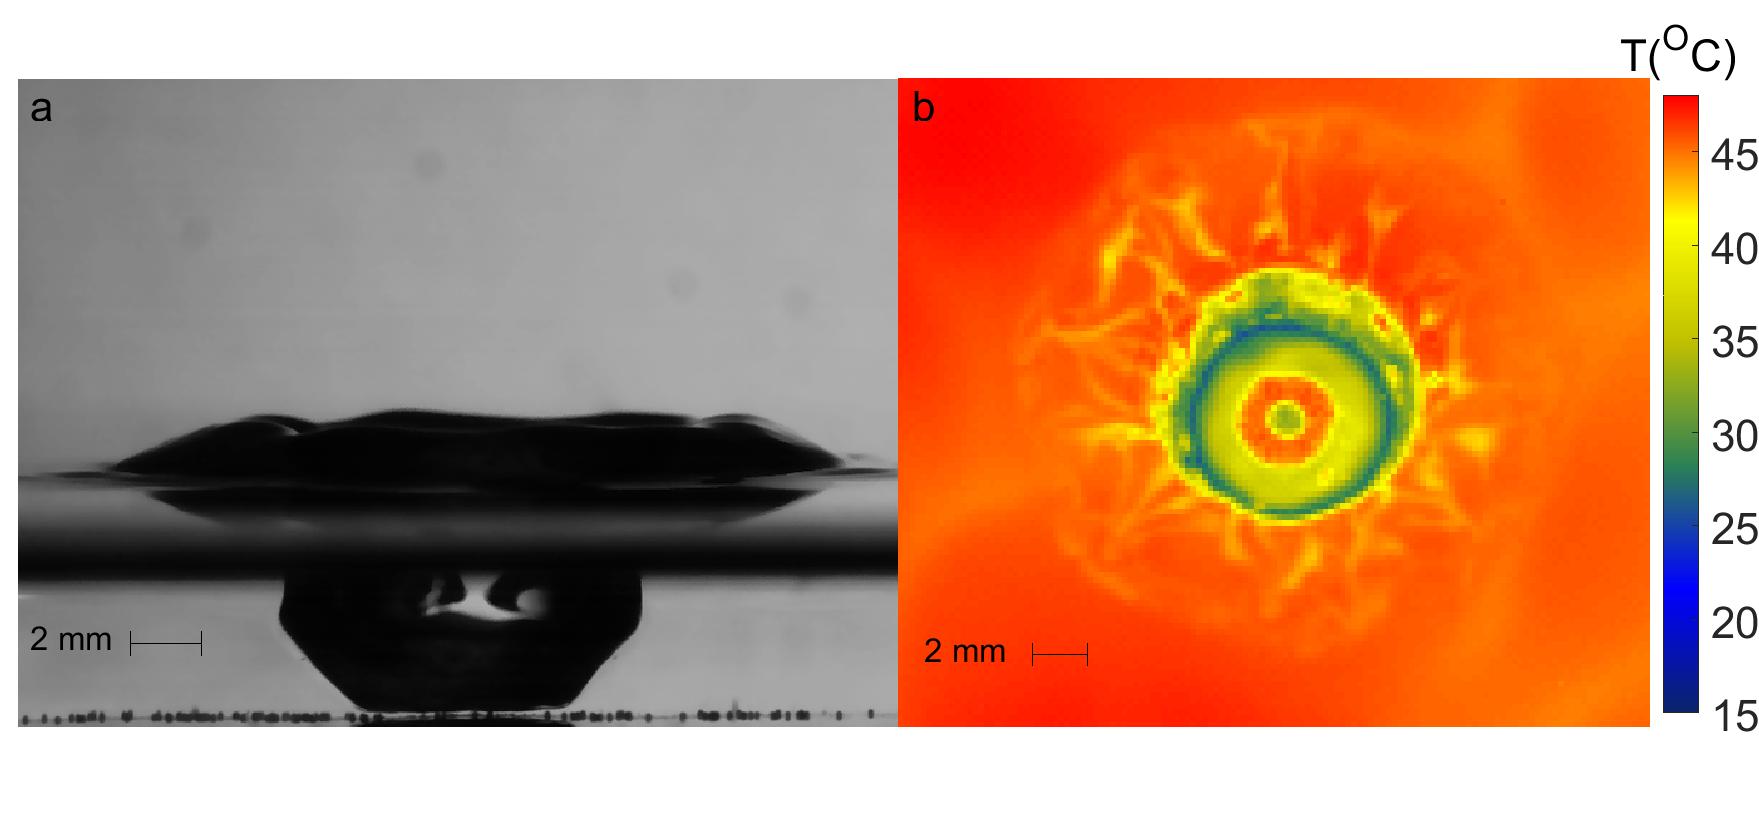 A composite image comparing the visible and infrared, showing the aftermath of a cold droplet impacting on a hot film. Linear features due to the uneven mixing are visible in the infrared image.